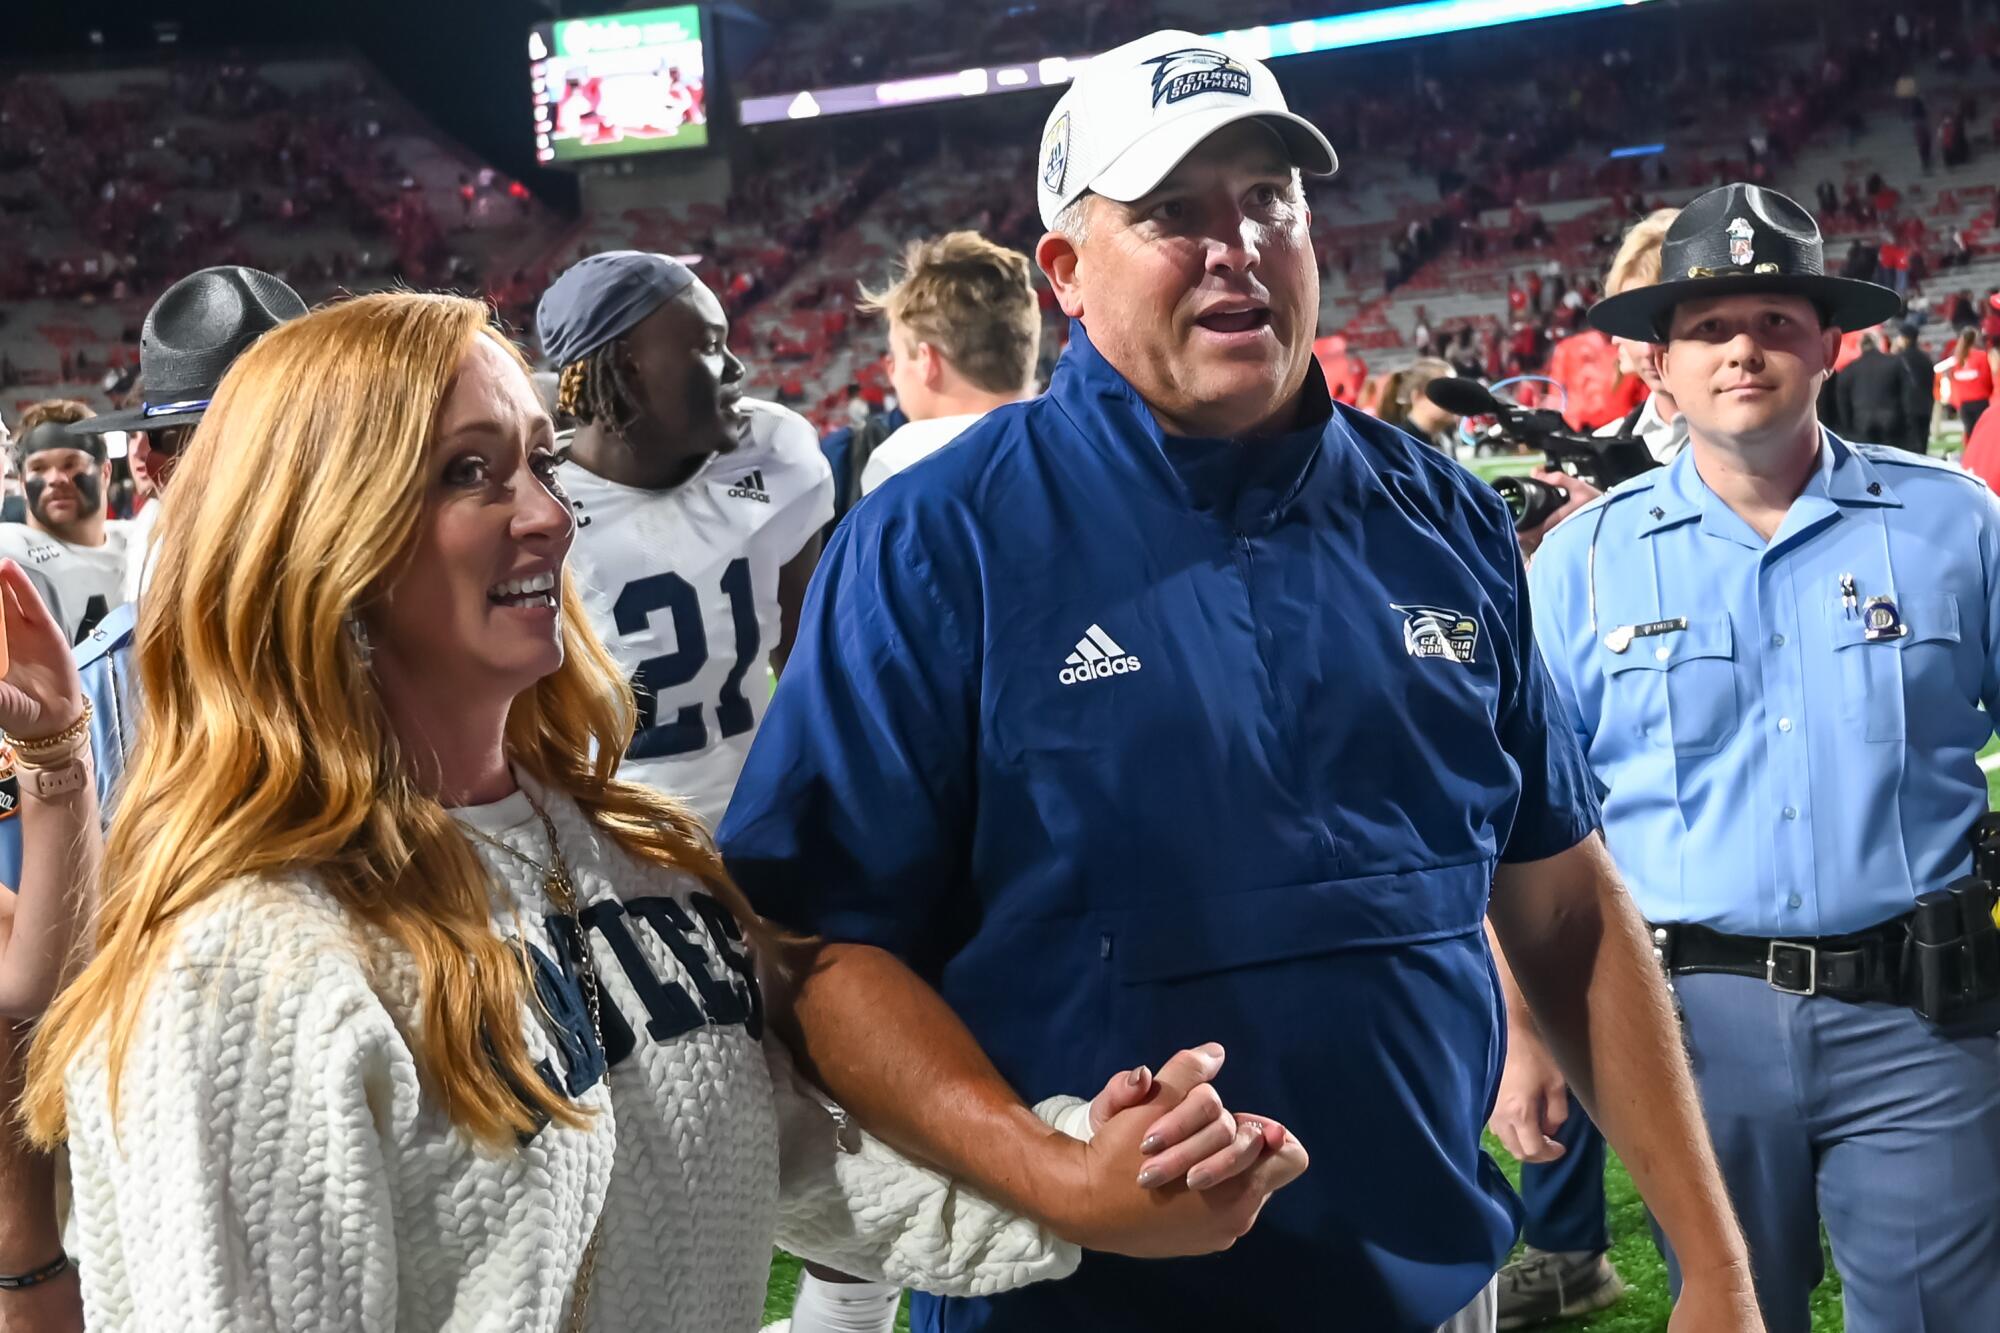 Georgia Southern coach Clay Helton and his wife, Angela, leave the field holding hands.